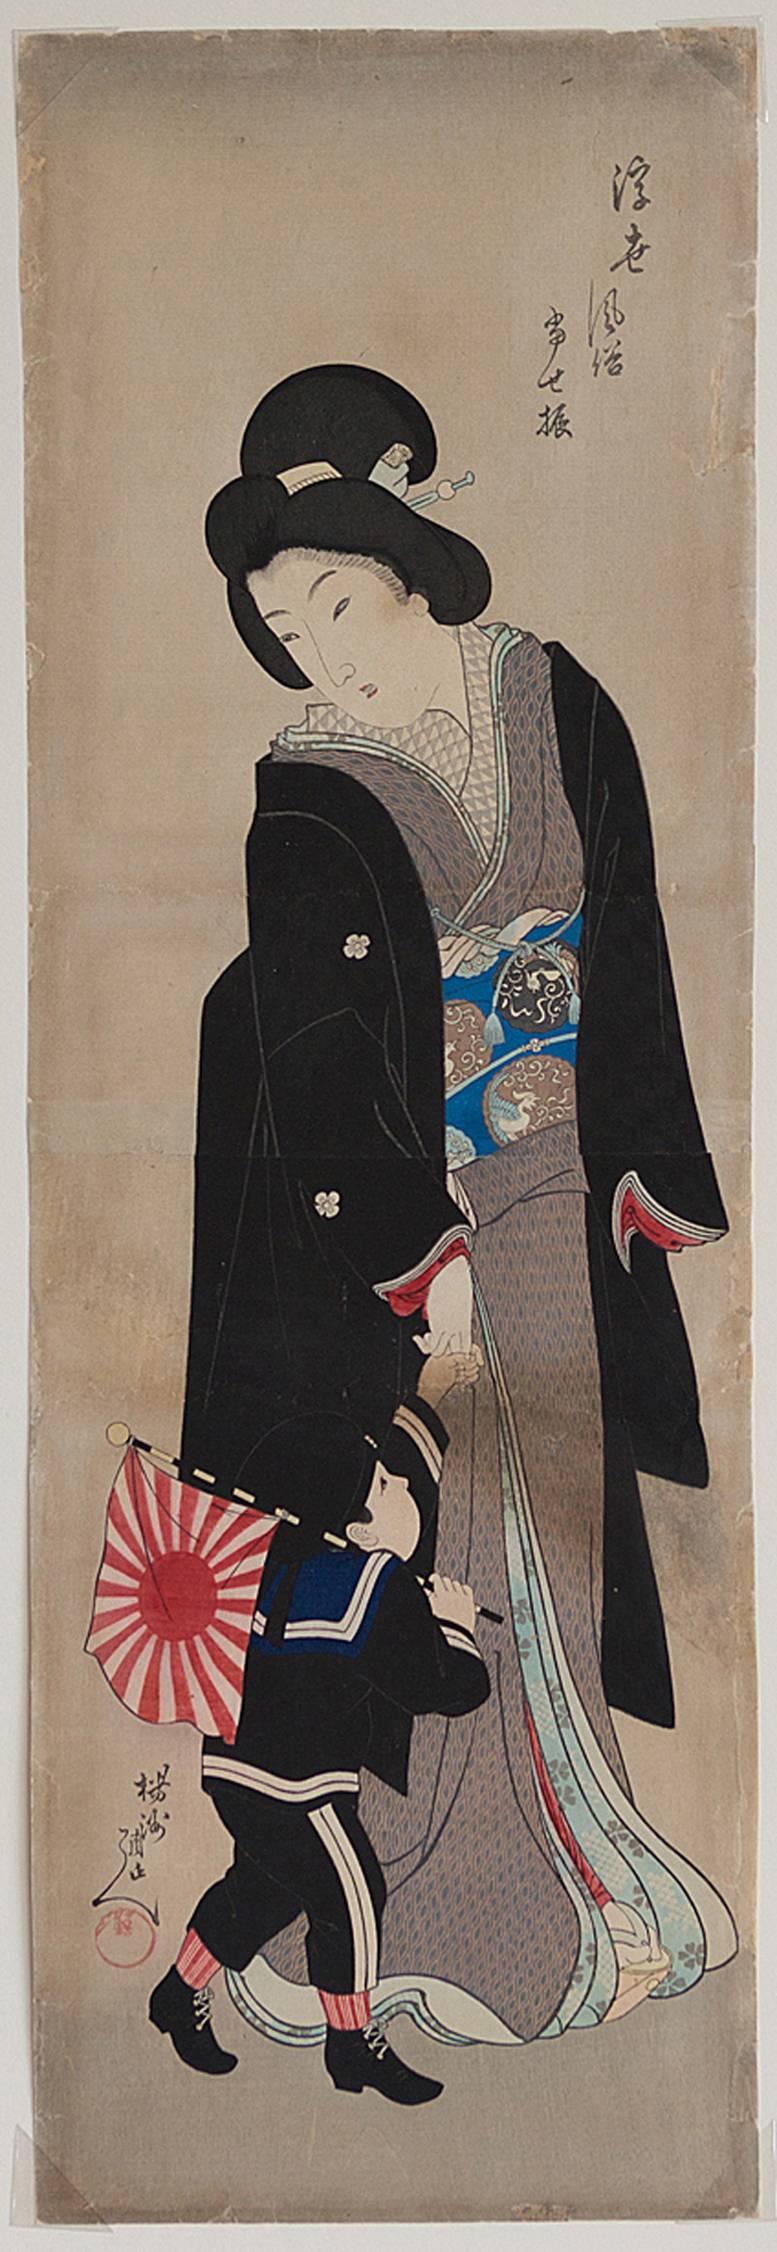 A Mother Takes her Son for A Walk during the Russo-Japanese War. - Print by Toyohara Chikanobu